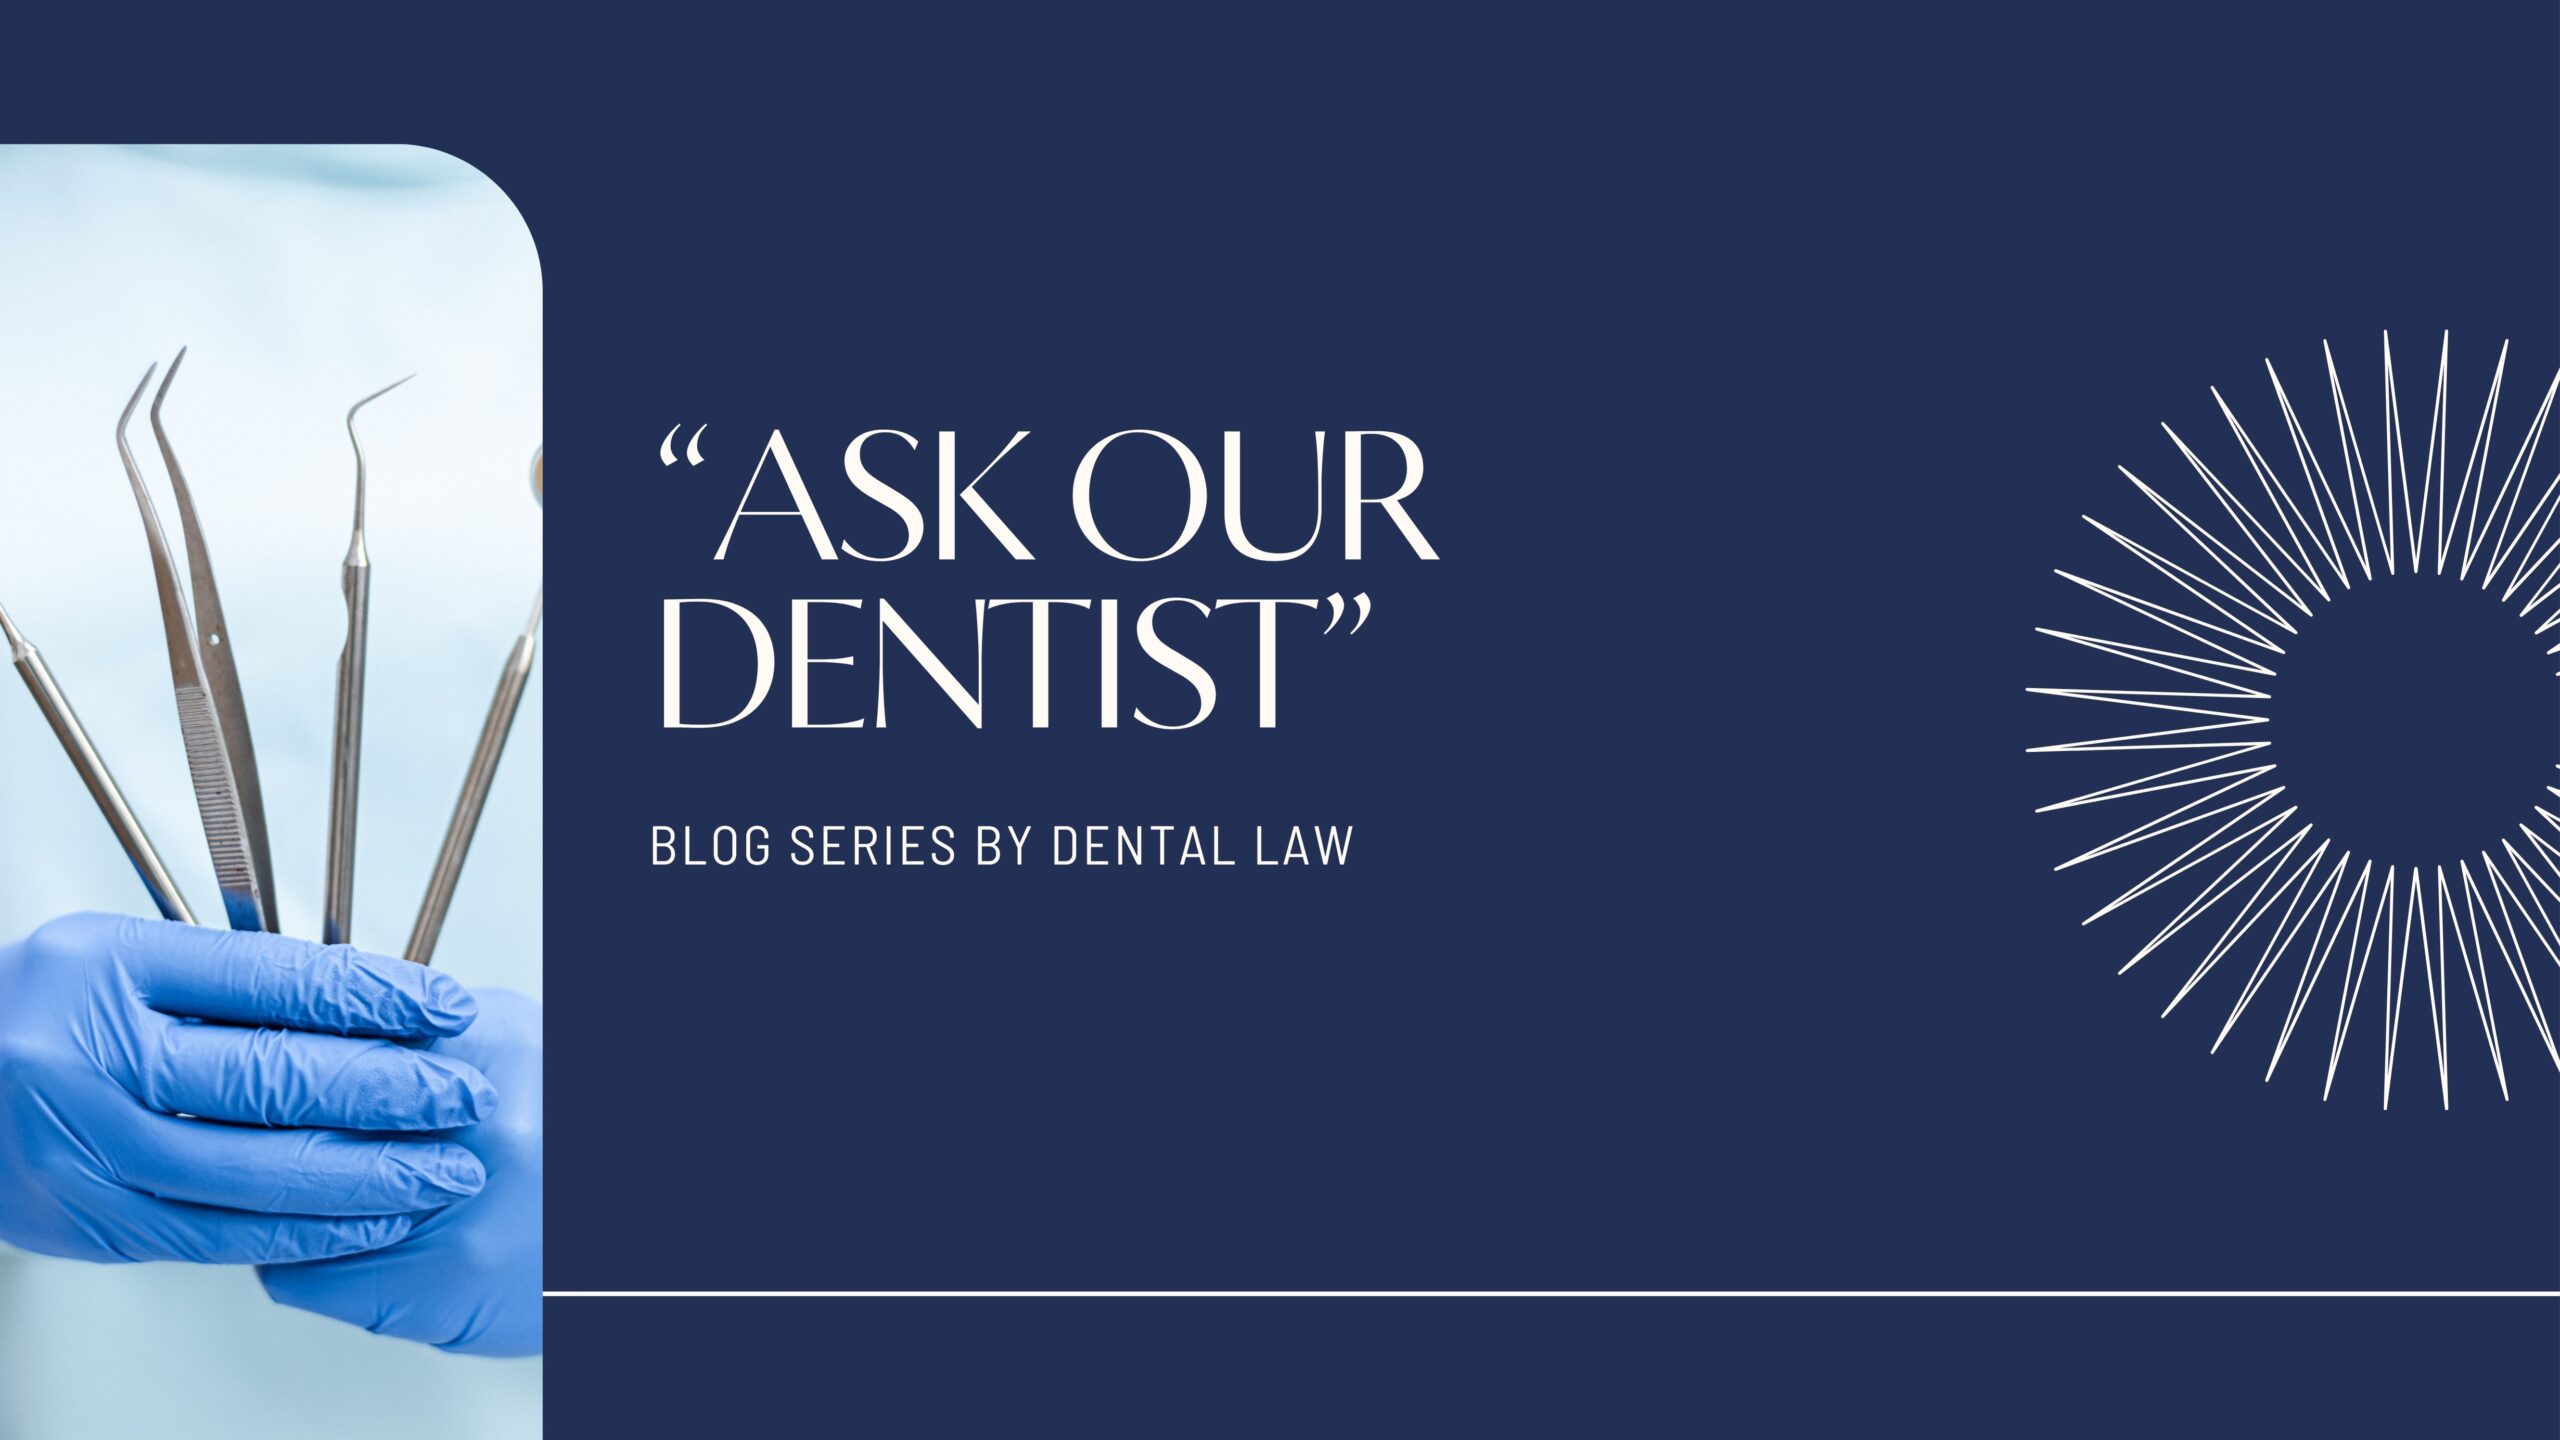 Ask our Dentist, "Are electric toothbrushes better than manual toothbrushes?"